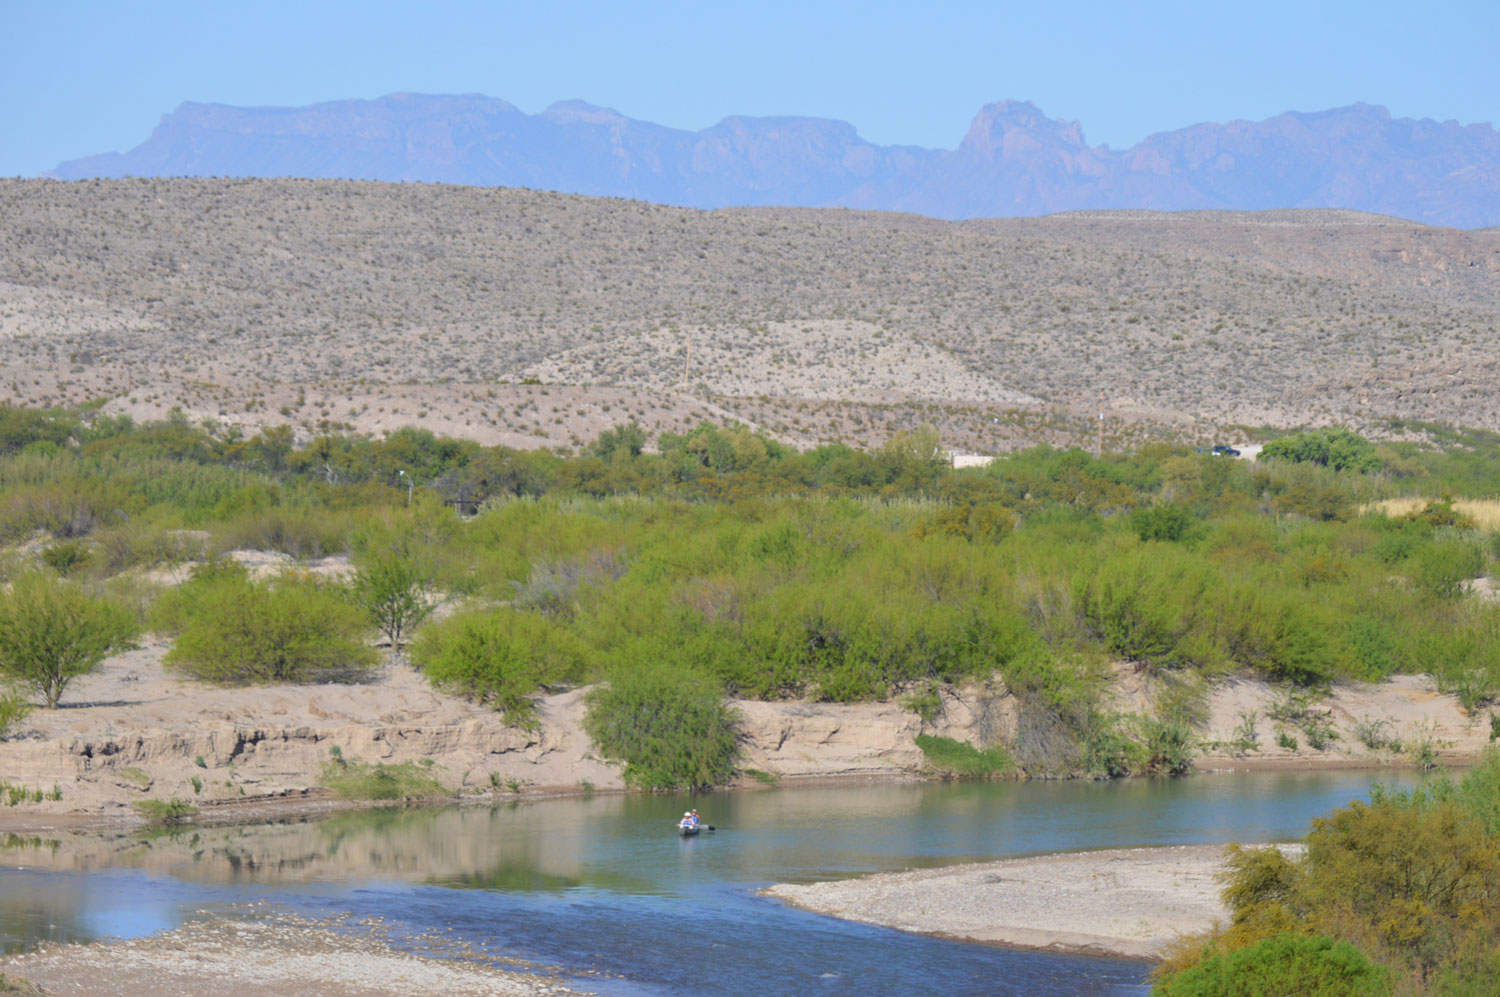 Canoe on the Rio Grande river with the Chisos Mountains in the background